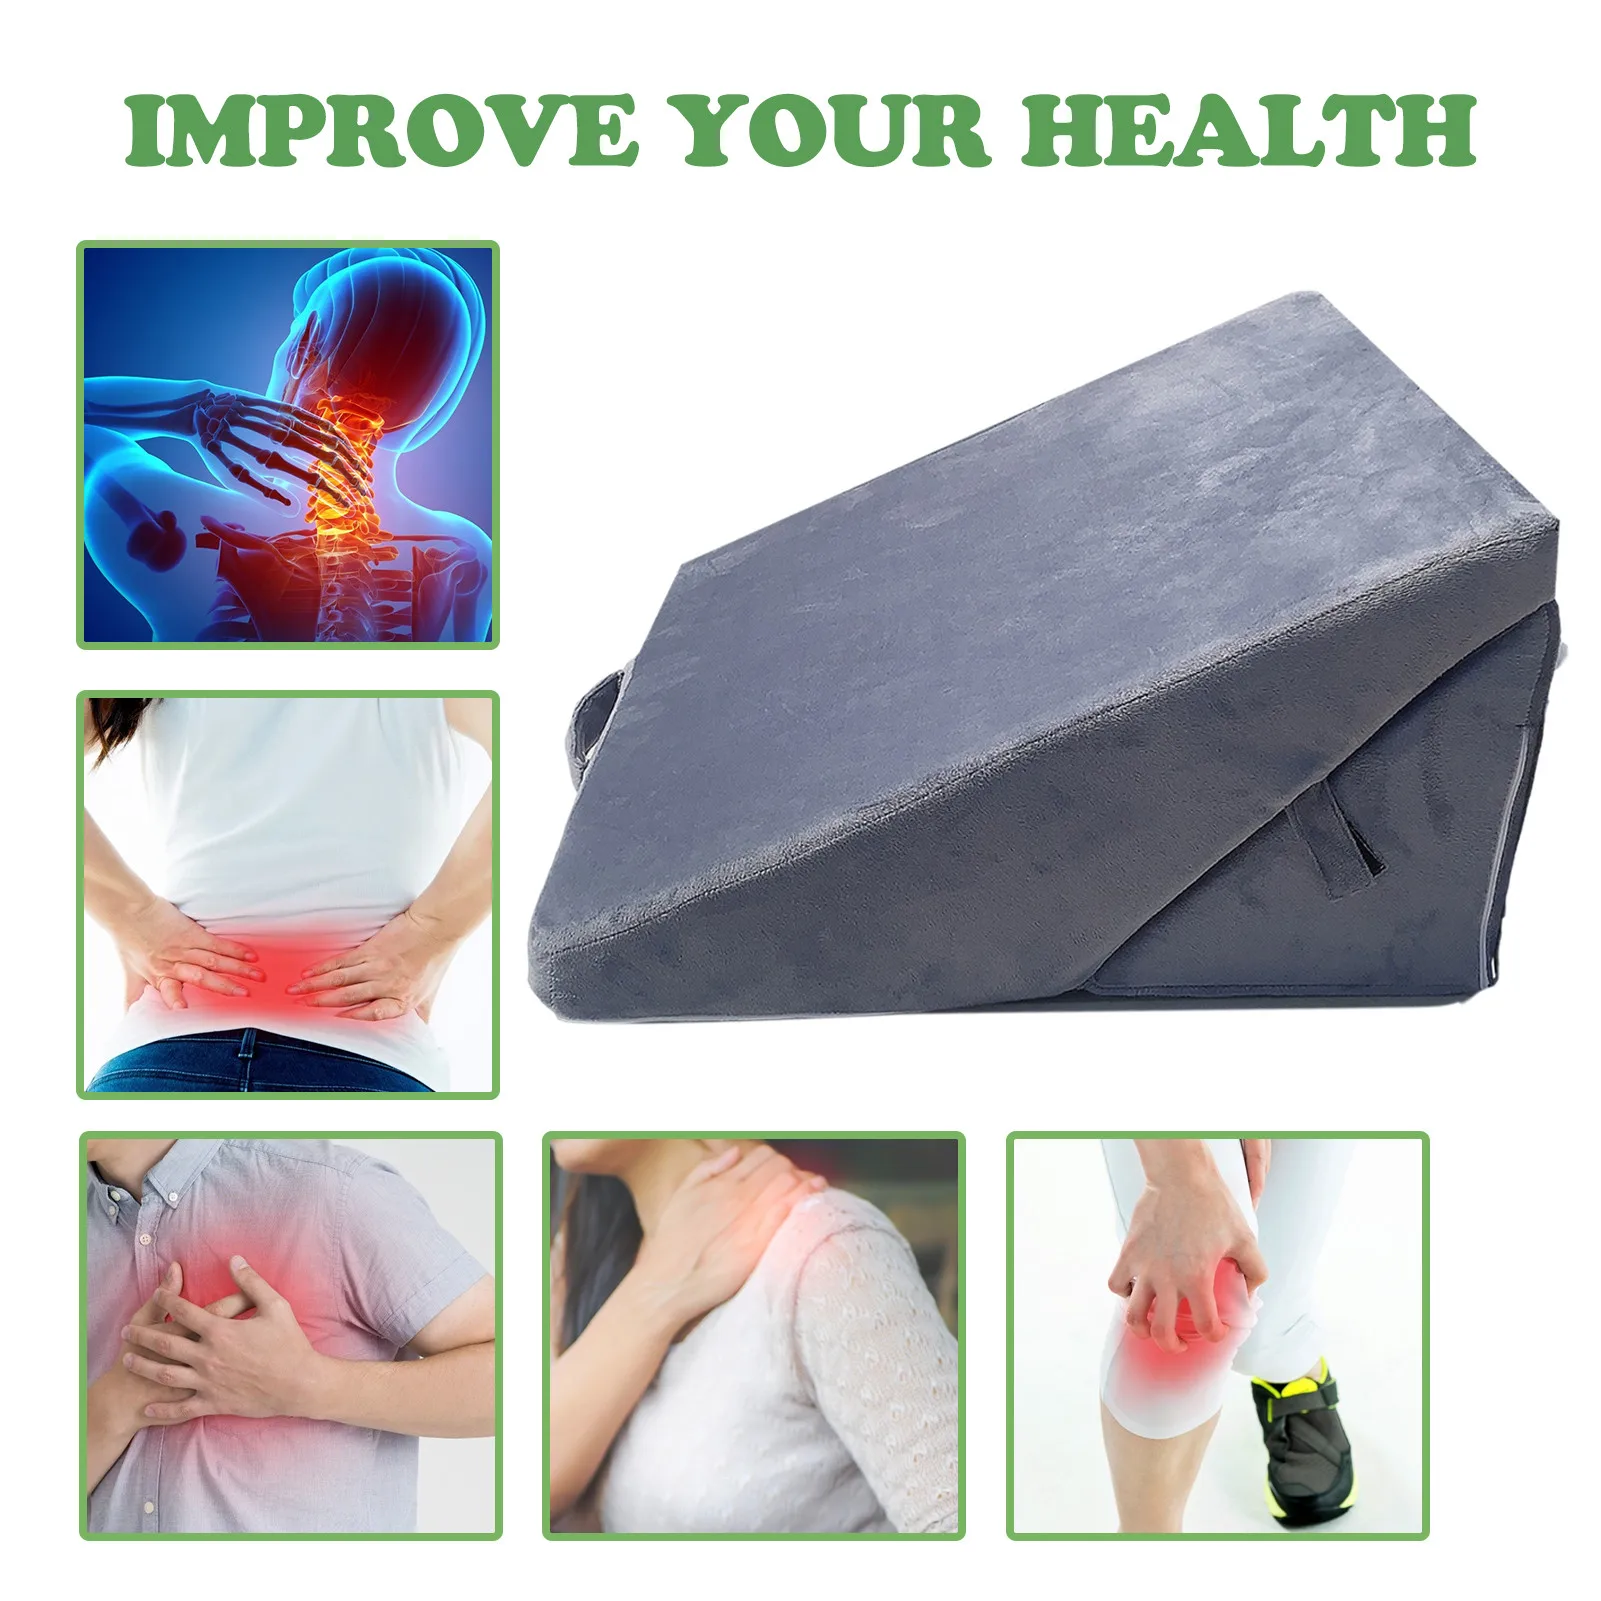 Foldable Memory Foam Wedge Pillow Adjustable Sleeping Incline Cushion Neck Protection Slow Rebound Removed Pillows #WO